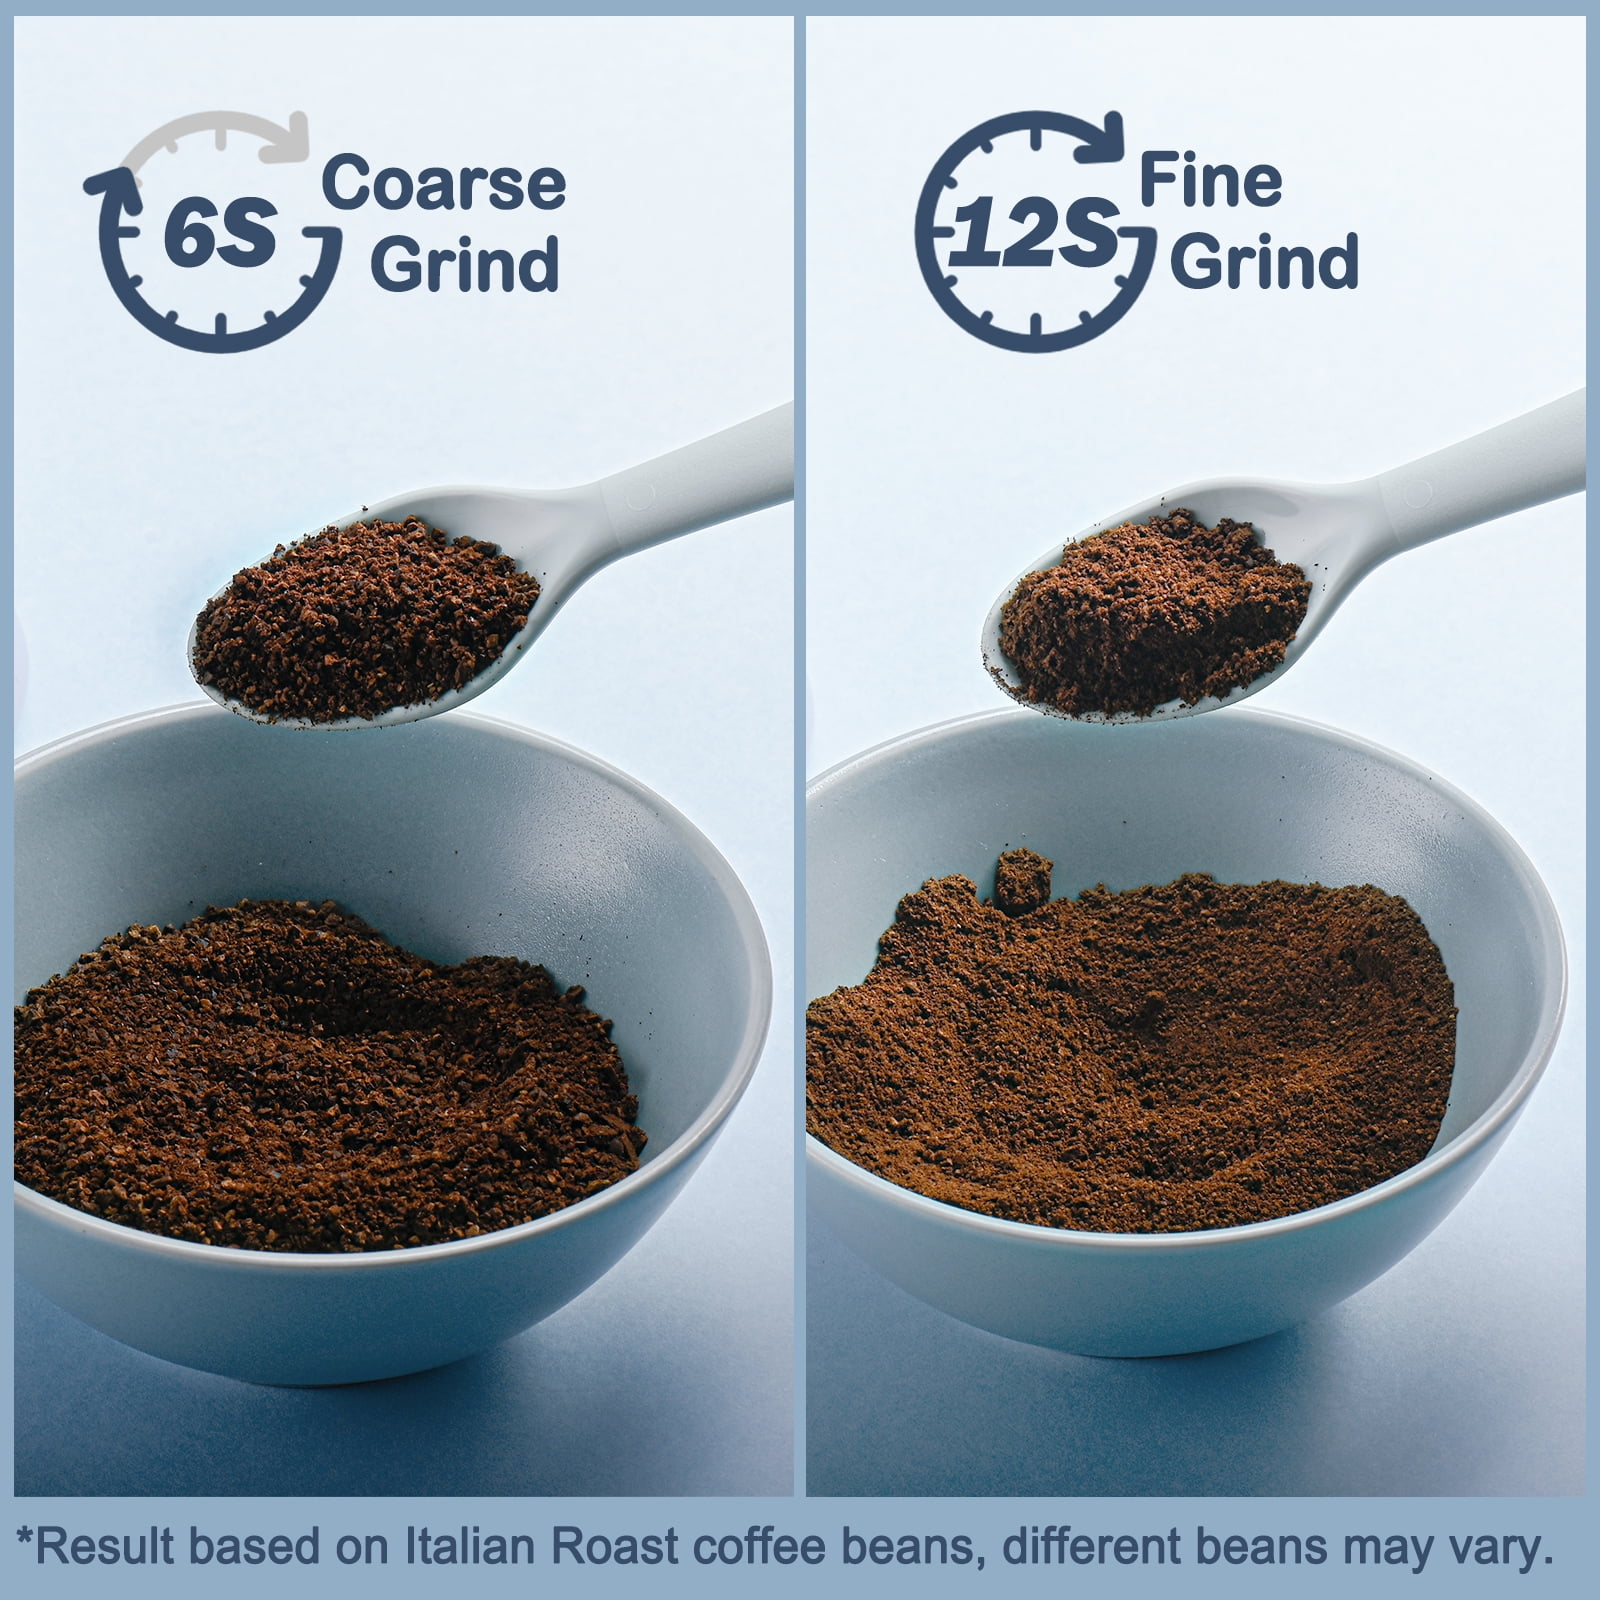 There are a few standards while grinding coffee beans coarse or fine that  are expected to explore. che…